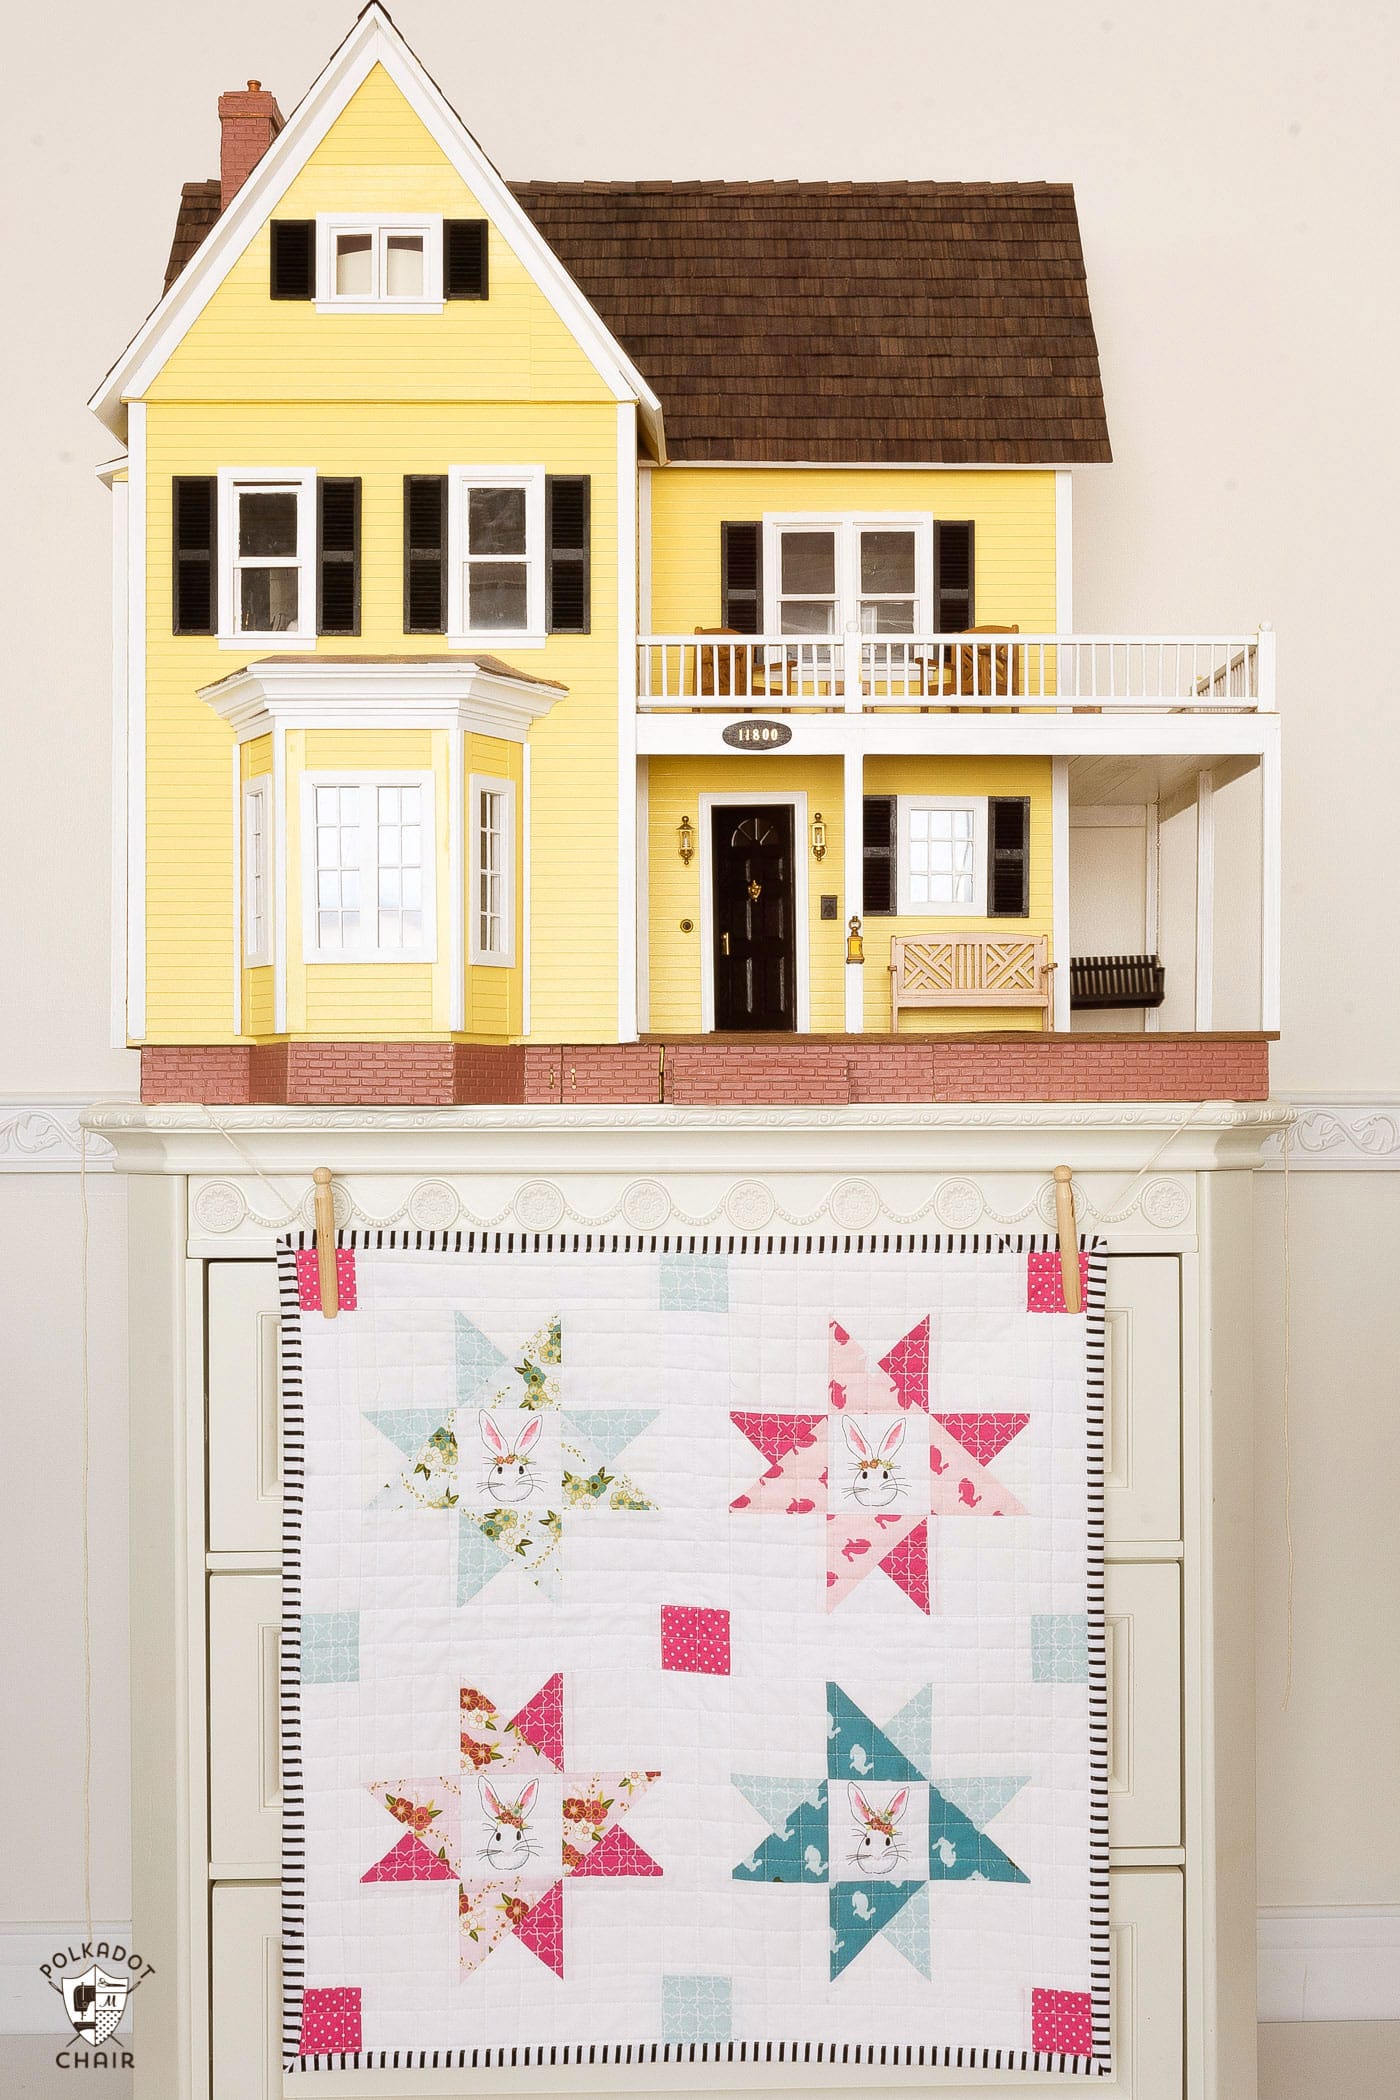 Wonderland; A free mini quilt pattern - would be so cute hung up as a decor in a Children's room - features Wonderland Fabric by Melissa Mortenson of polkadotchair.com